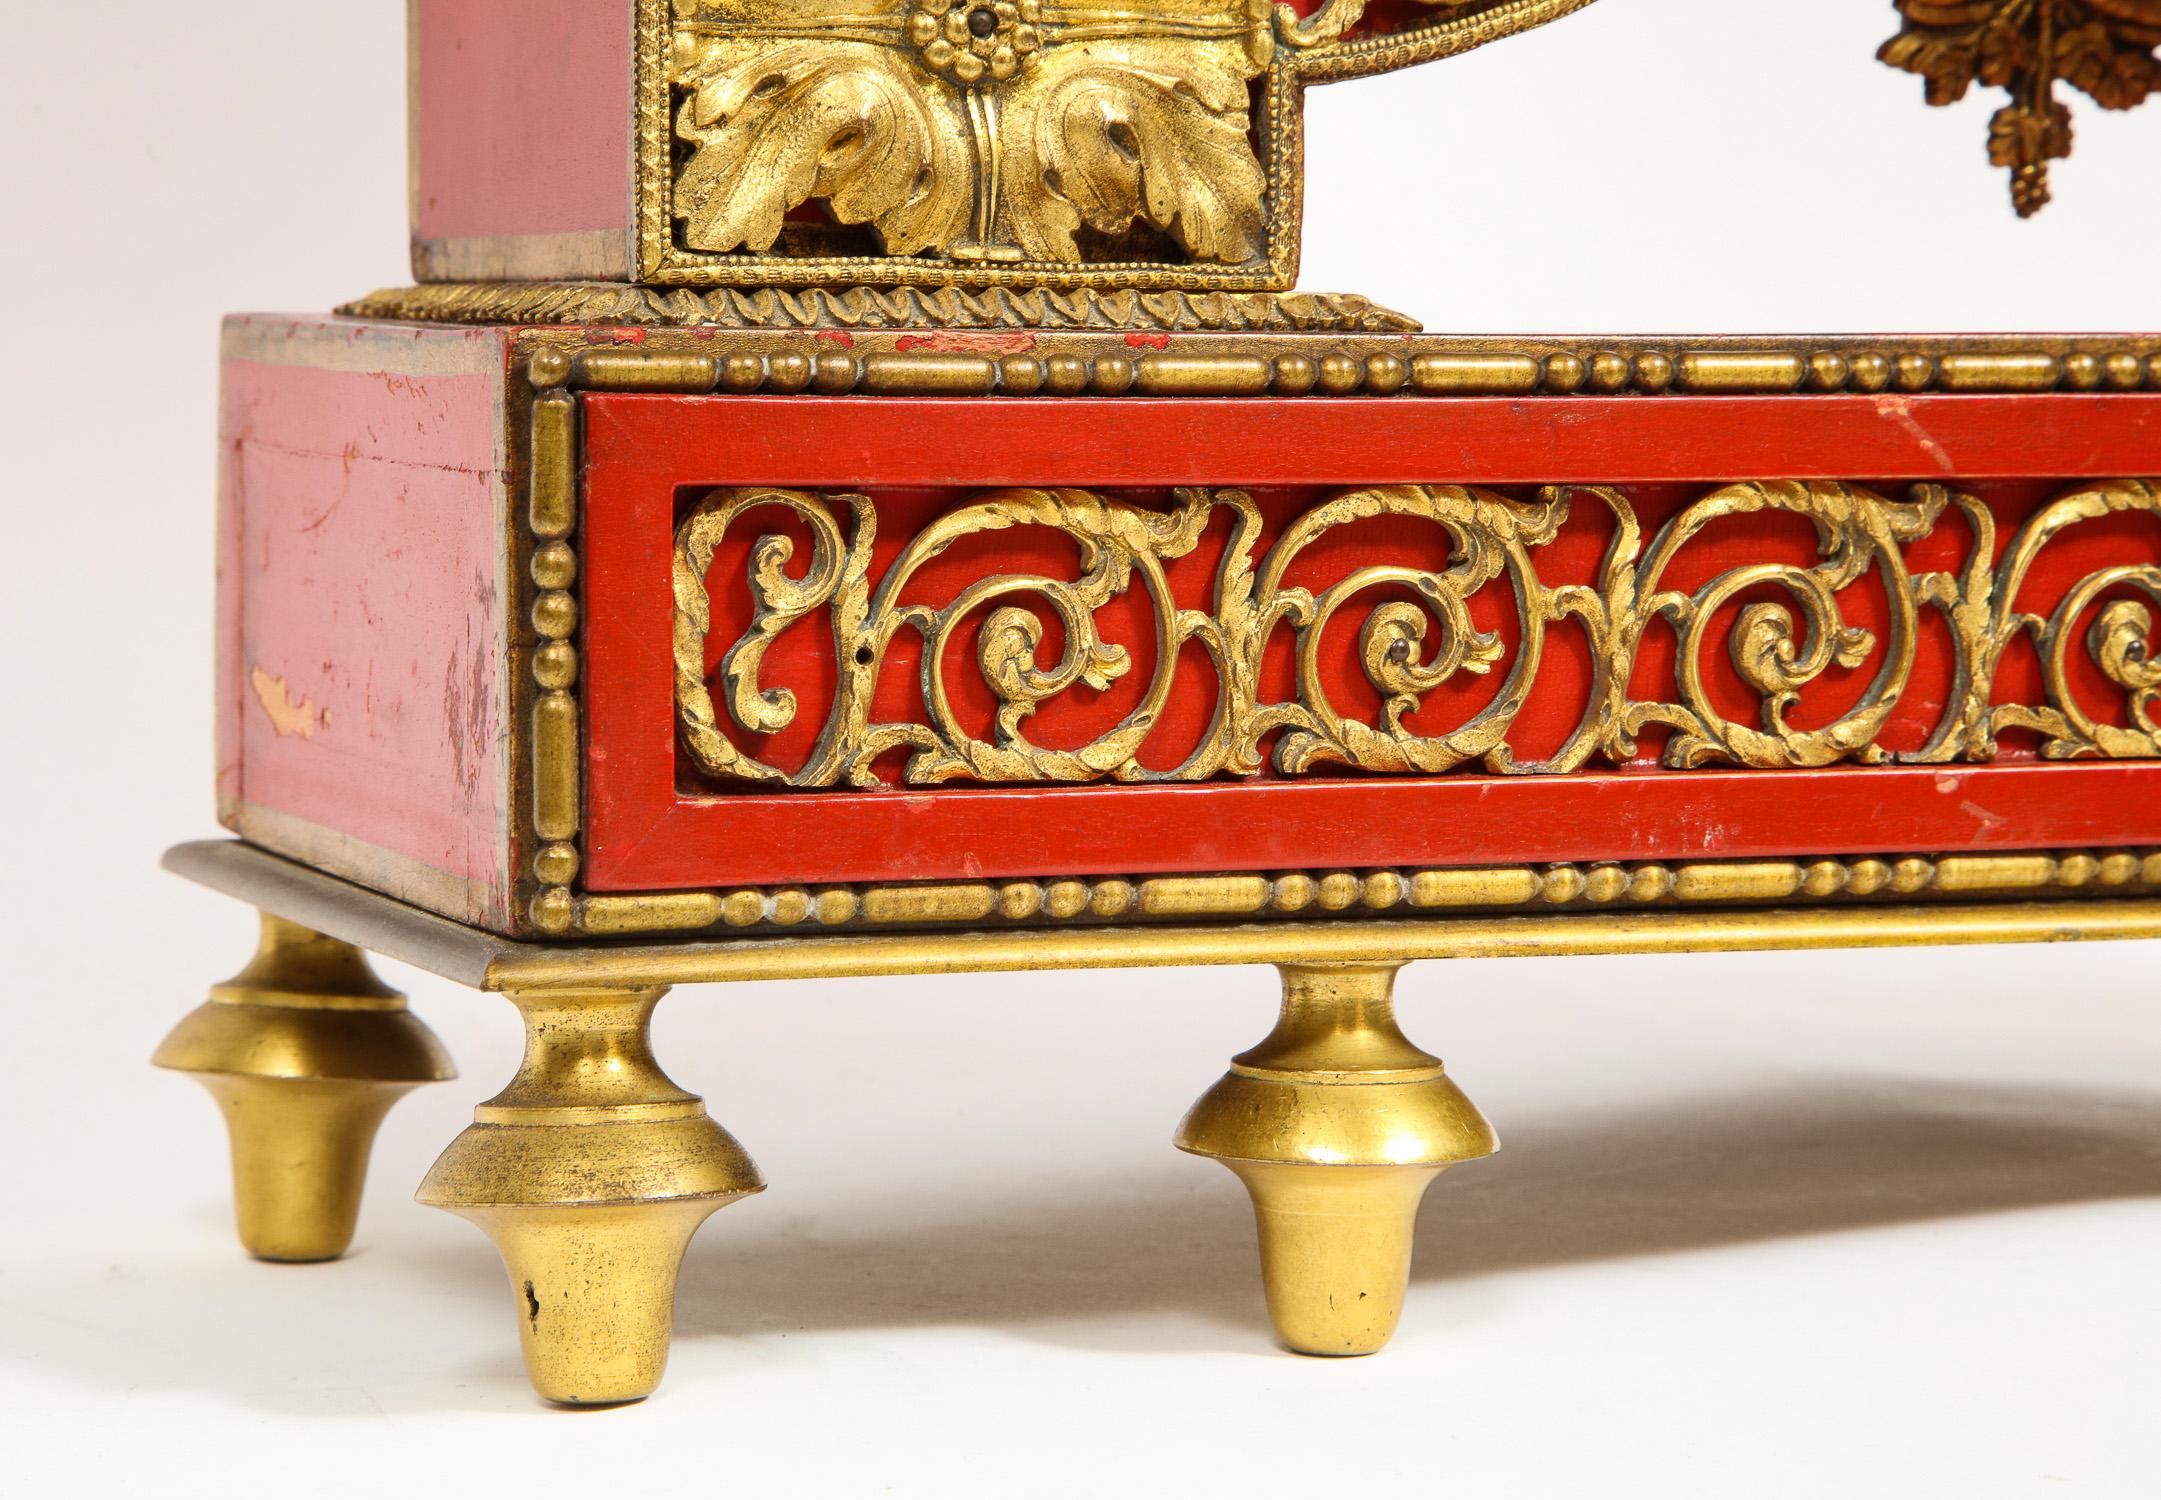 19th Century Gorgeous French Ormolu Gilt Bronze-Mounted Red Painted Mantel Clock, 1870